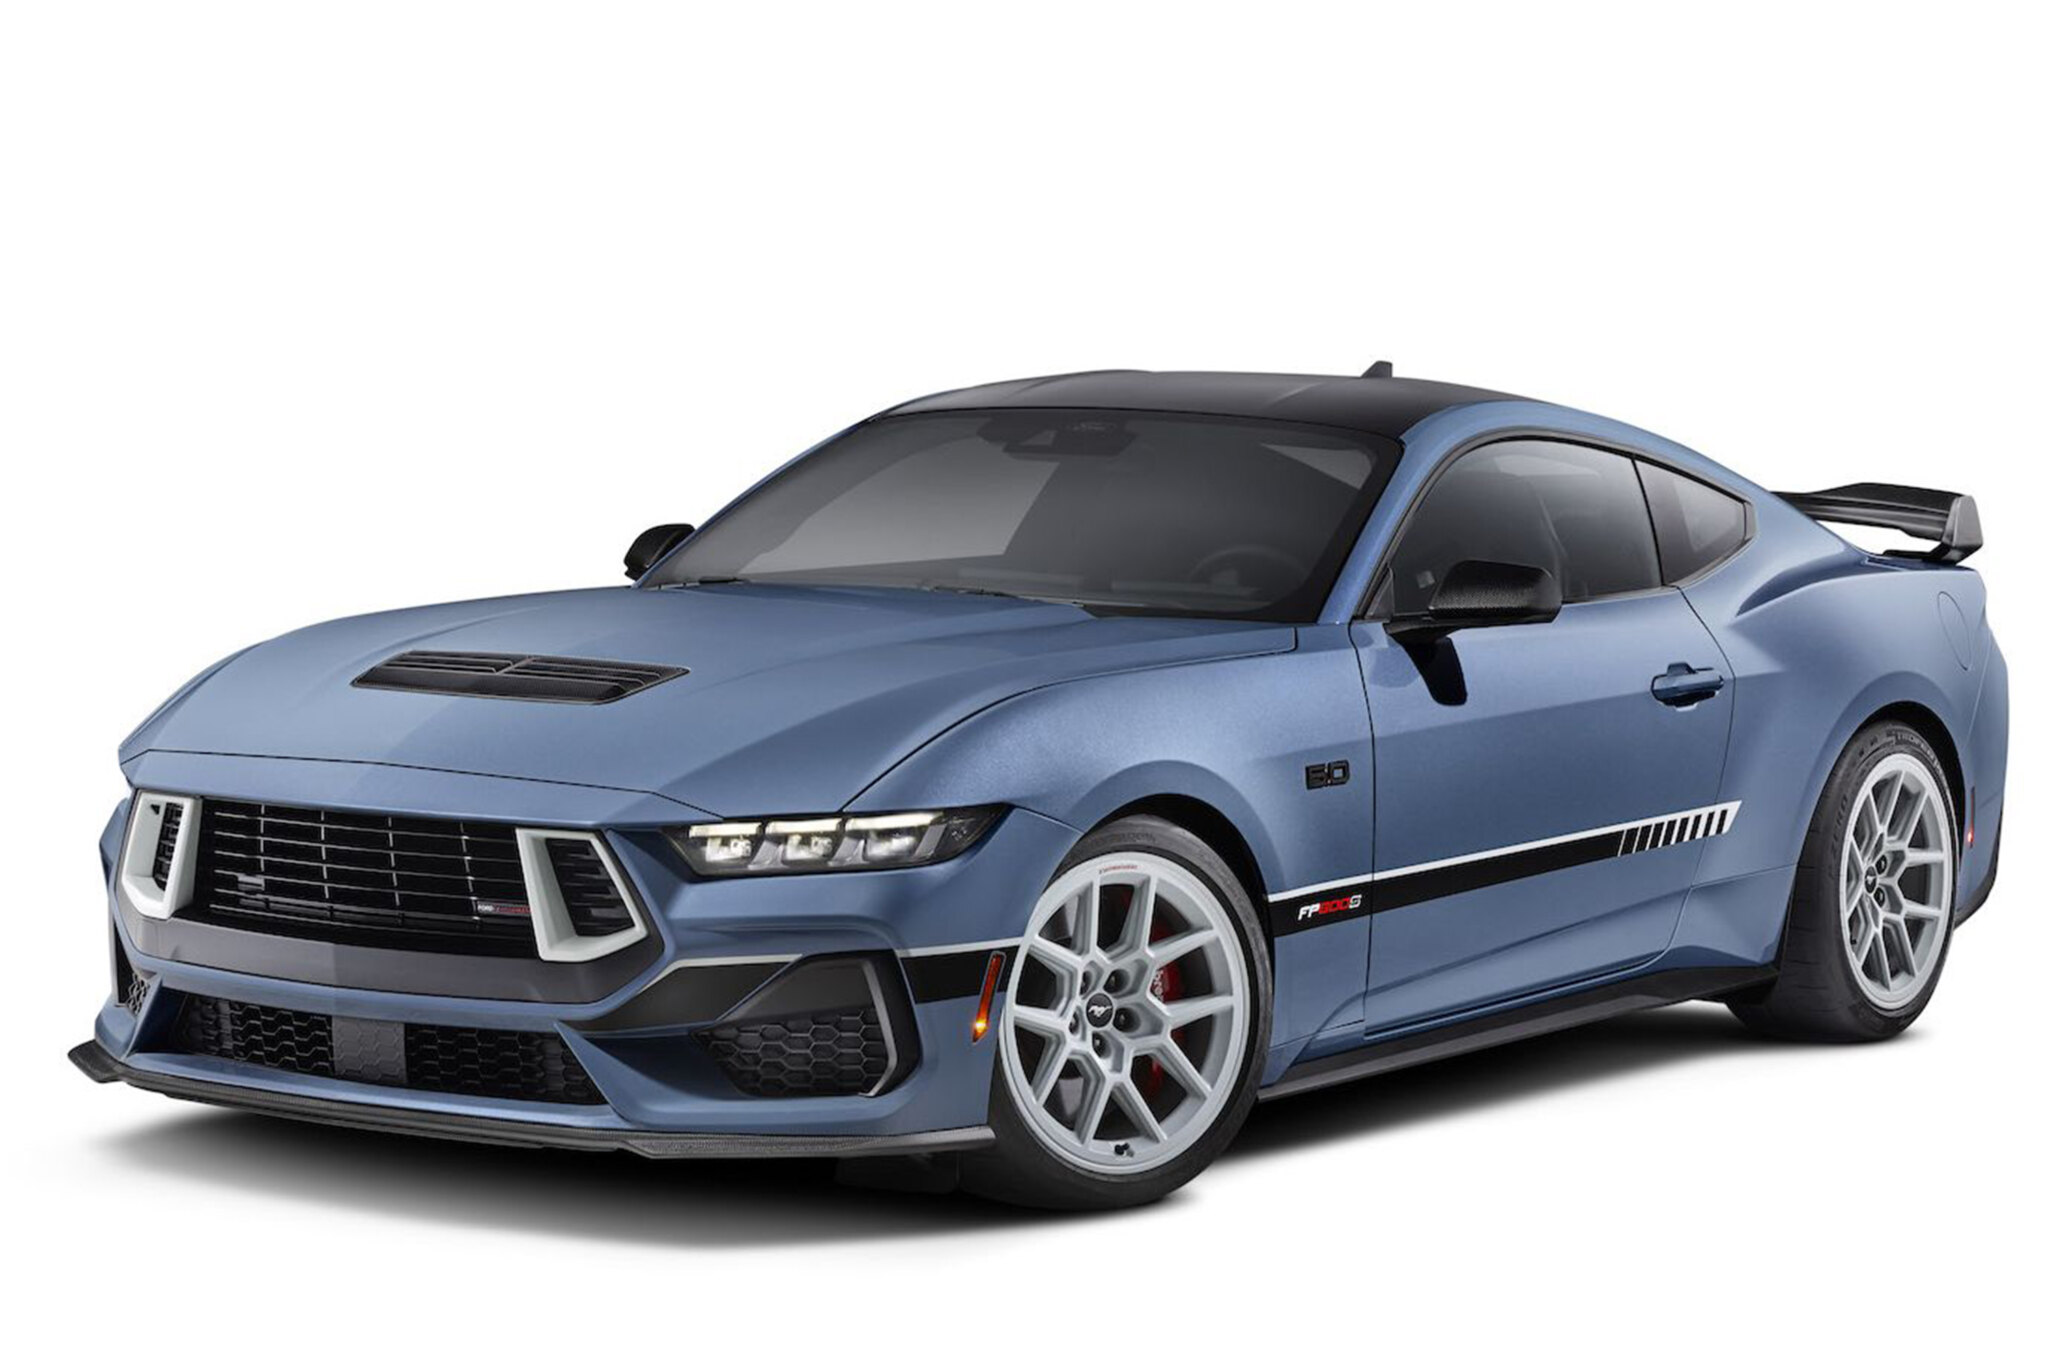 Ford Performance unveils FP800S Mustang concept car and new 800hp supercharger kit